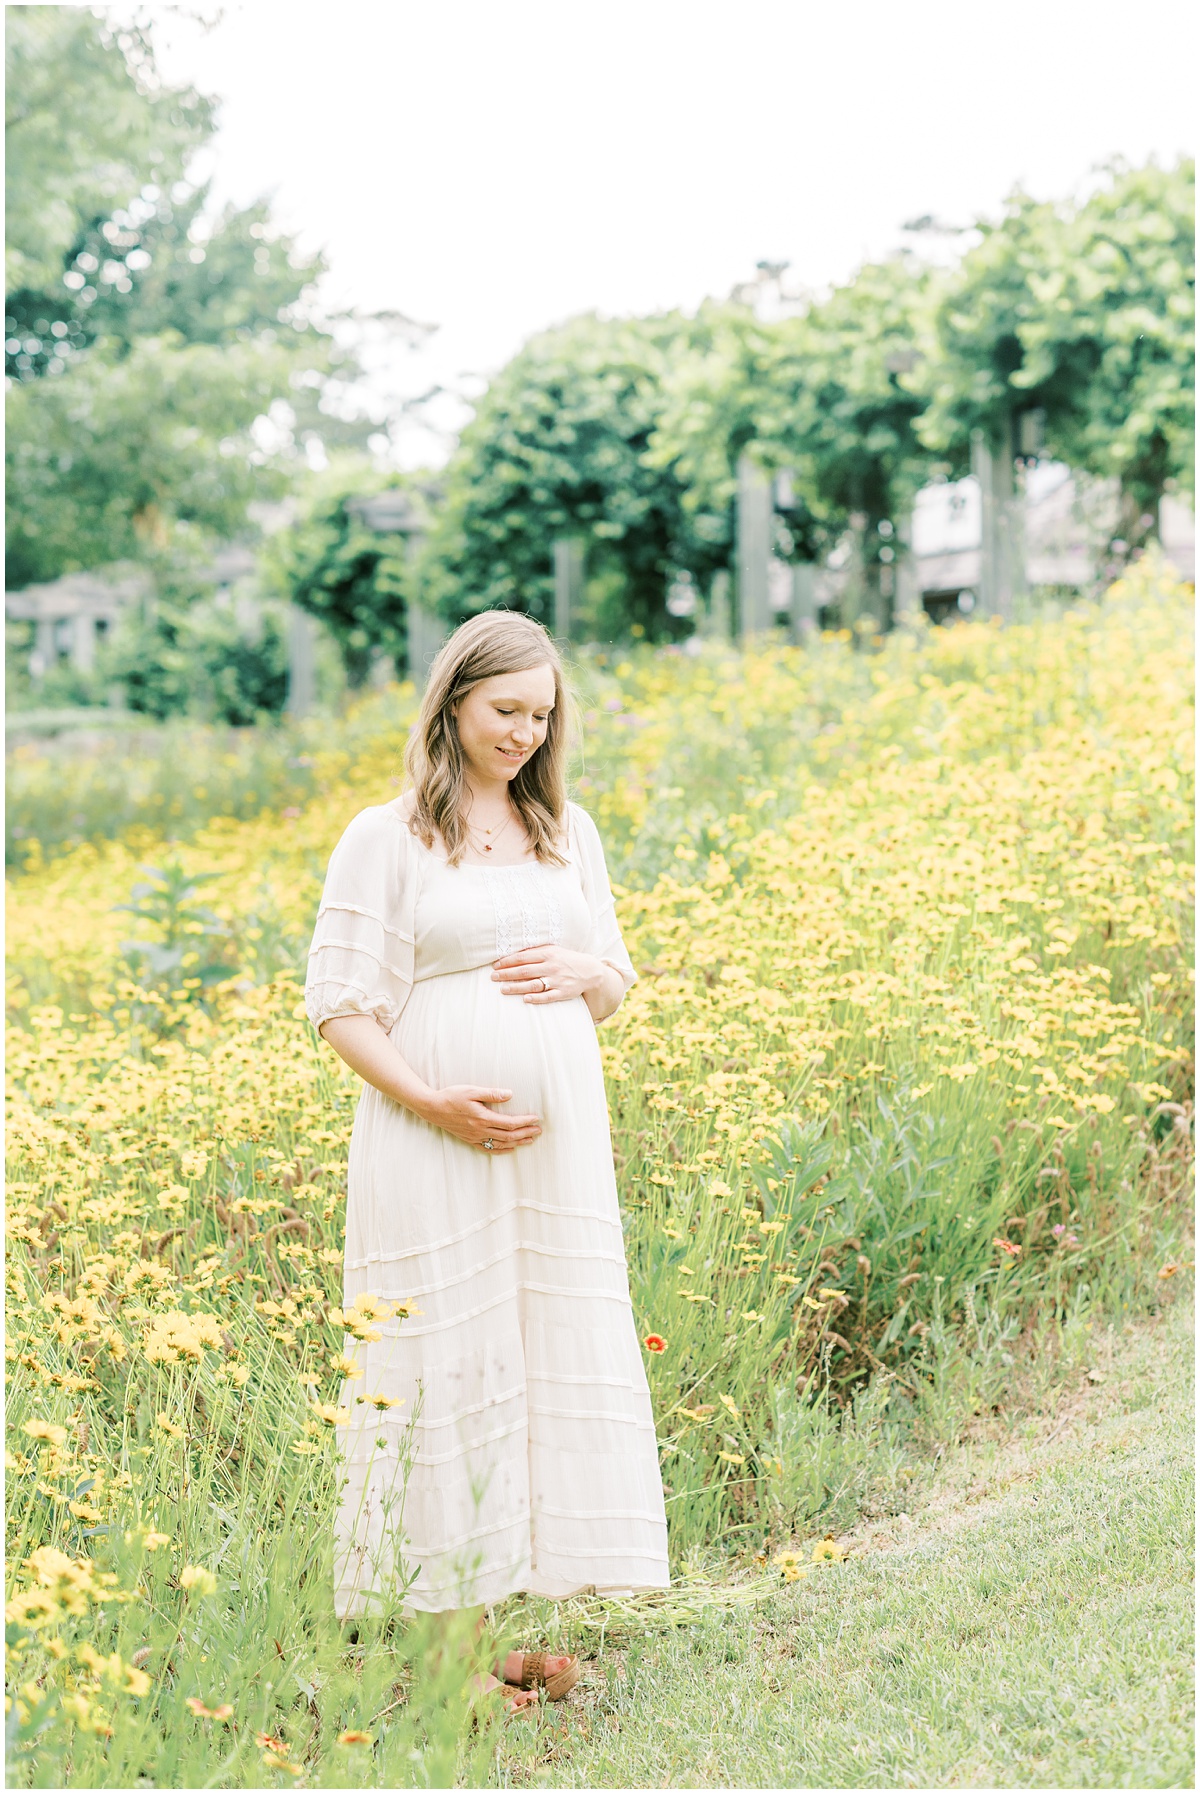 Maternity photography in Greenville SC